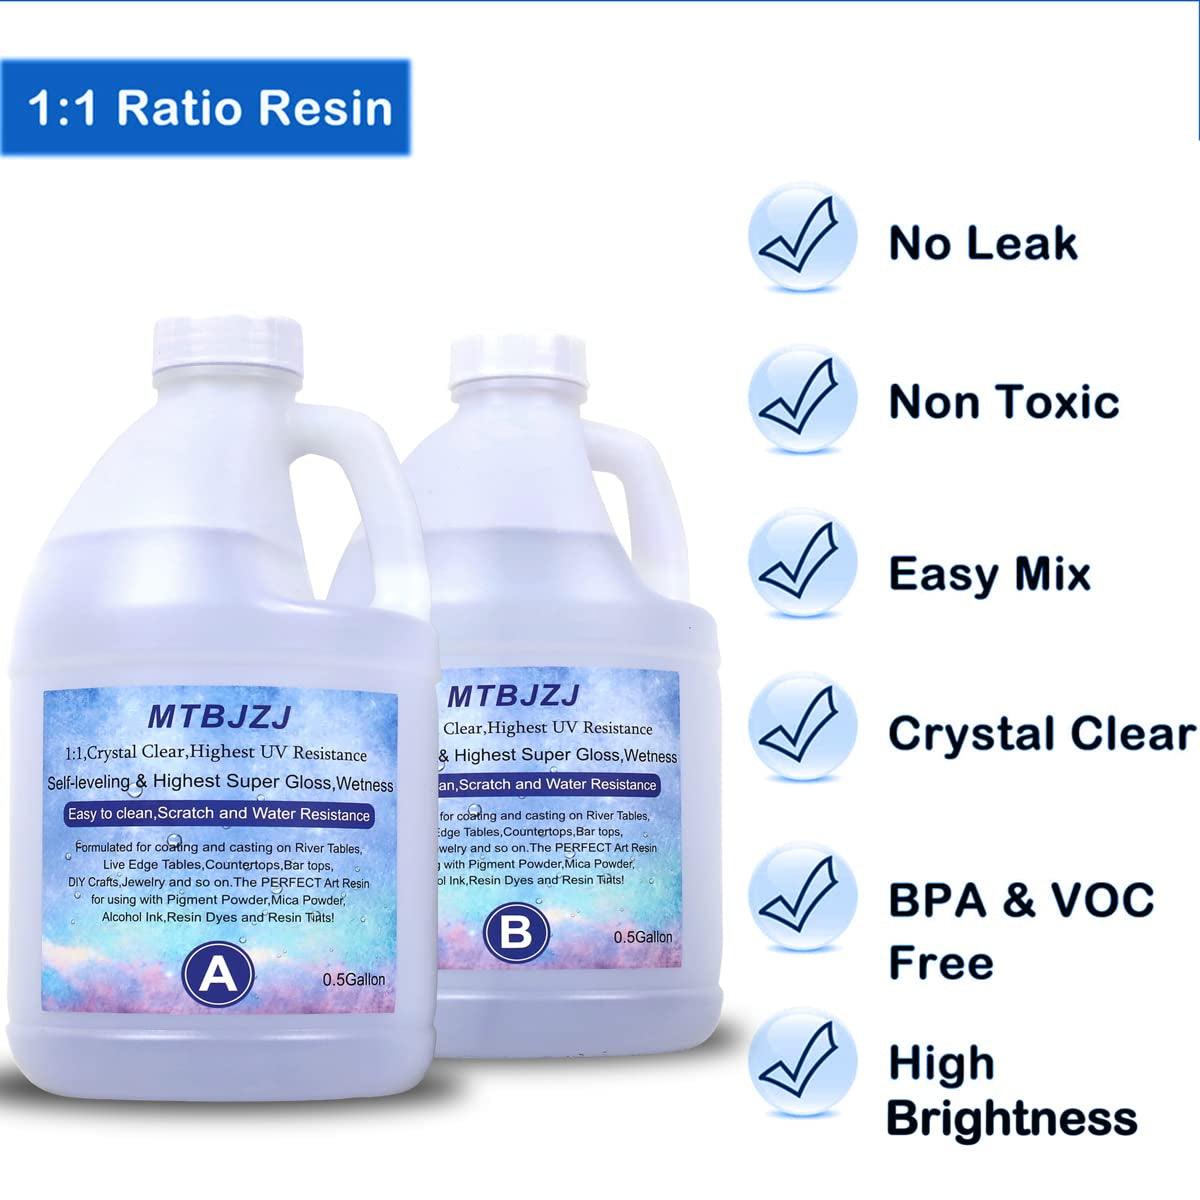 Epoxy Resin 1 Gallon Kit - Supplies 1:1 Crystal Clear Resin Epoxy and Hardener for Super Gloss Coating | for Bars, Tabletop Art Jewelry Casting Molds DIY - WoodArtSupply